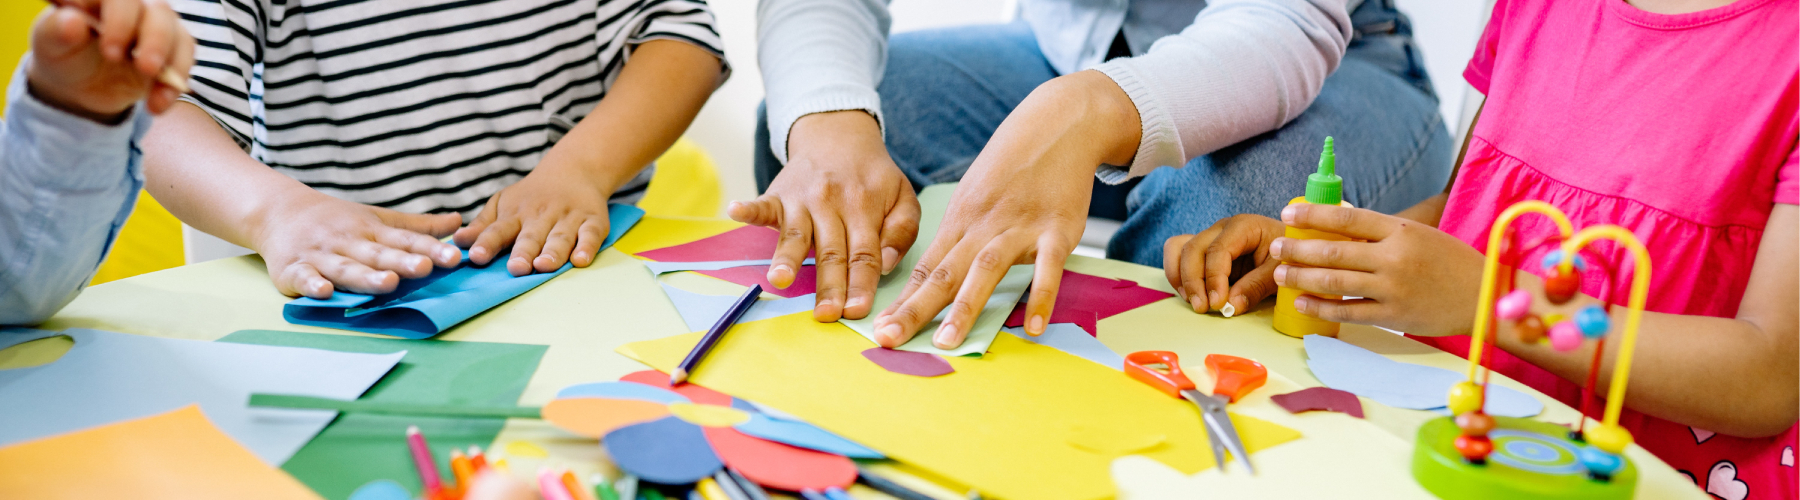 students cutting and folding construction paper on arts and crafts table